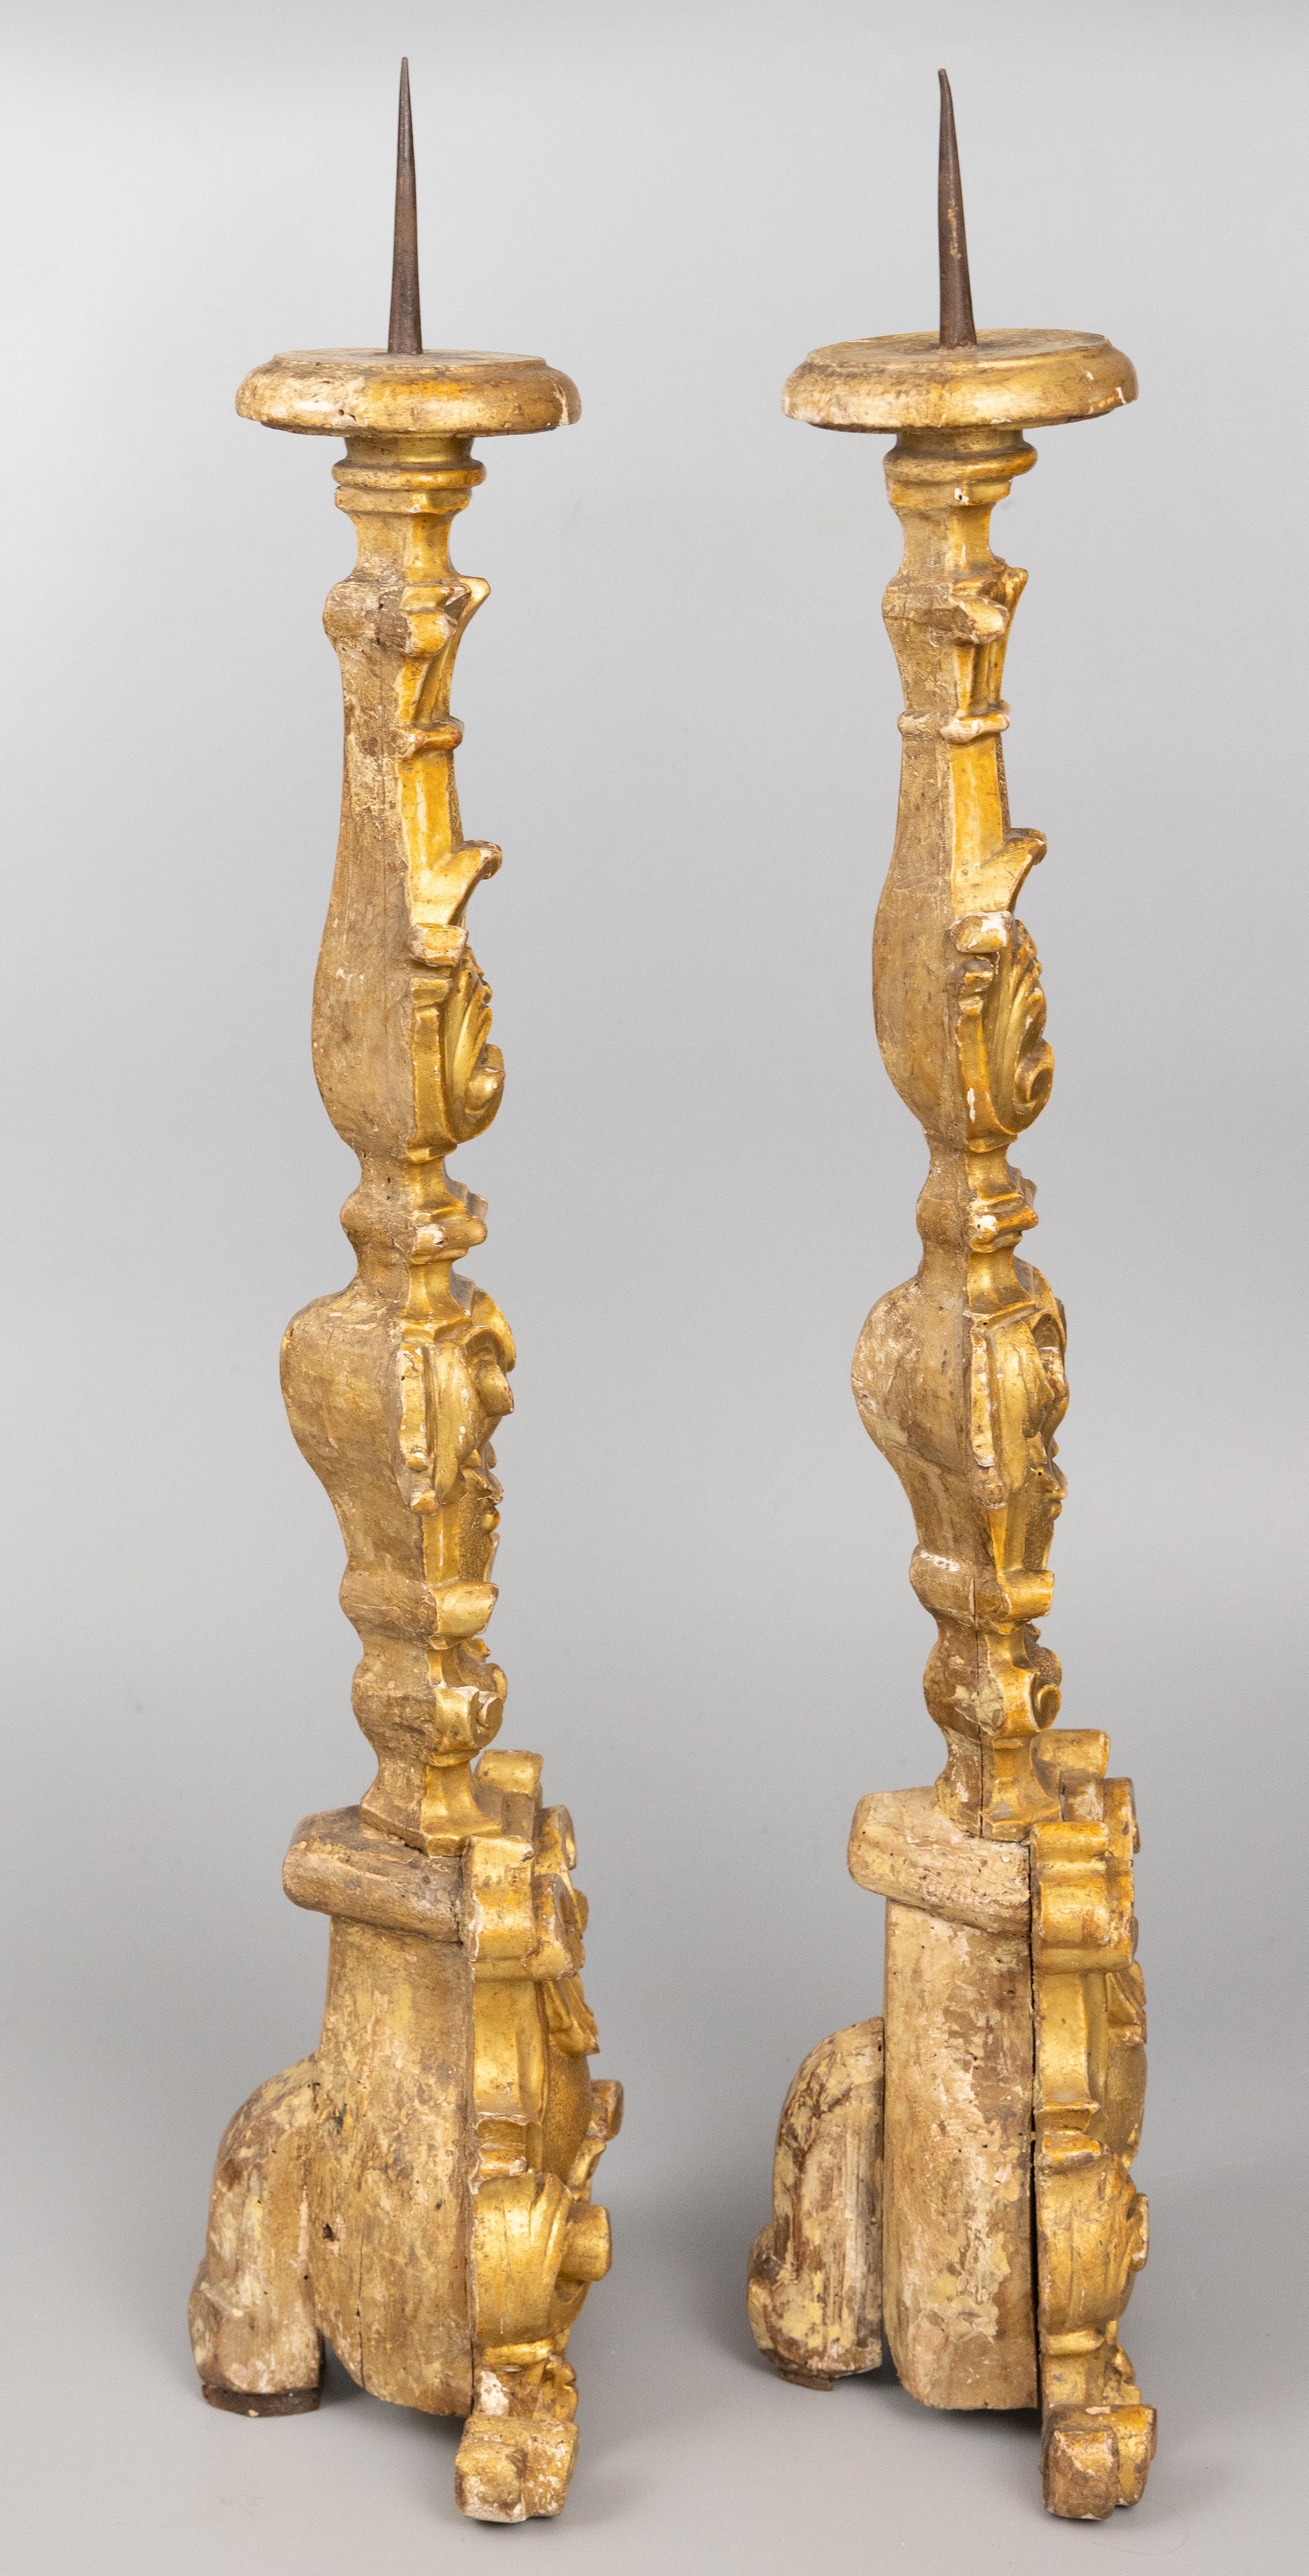 Pair of 19th C. Italian Giltwood Floor Pricket Candlesticks Torchieres In Good Condition For Sale In Pearland, TX